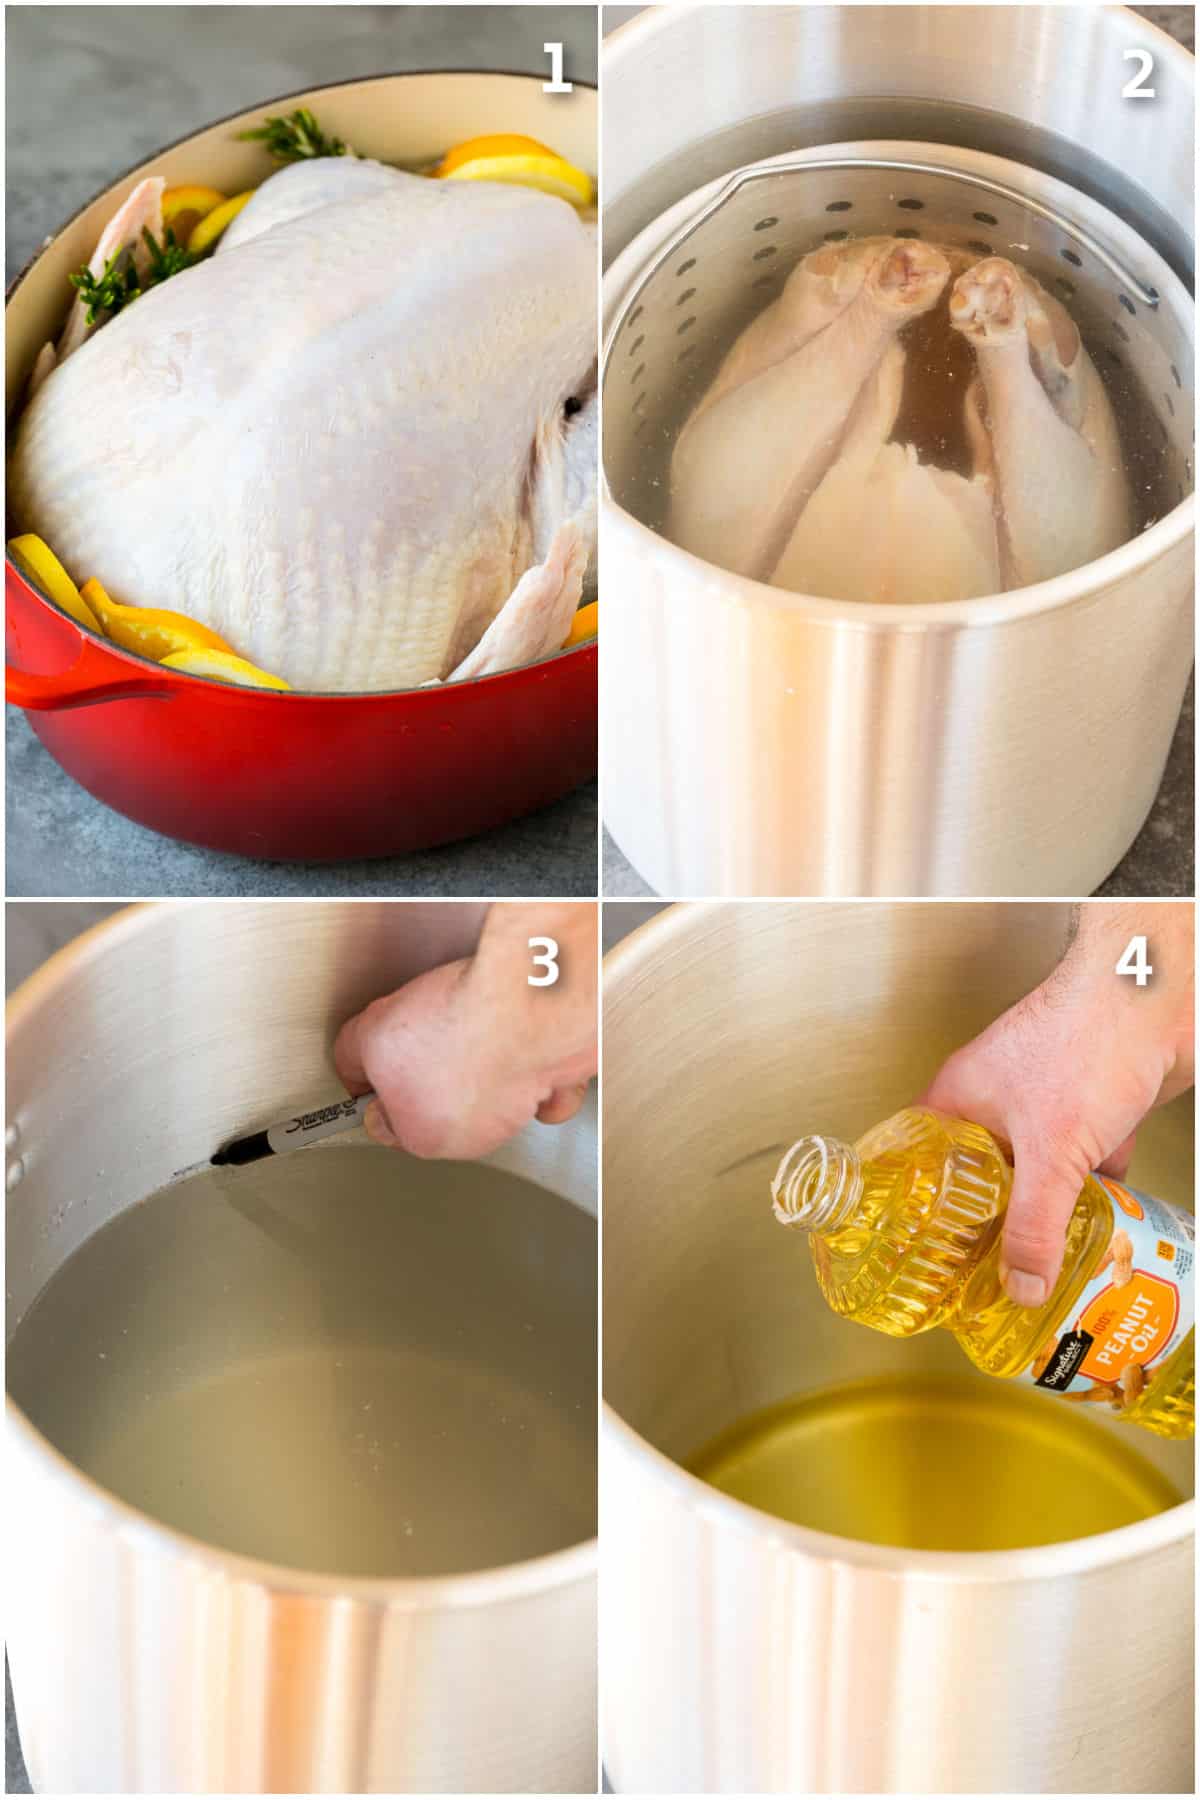 Step by step shots showing how to prepare a turkey fryer.